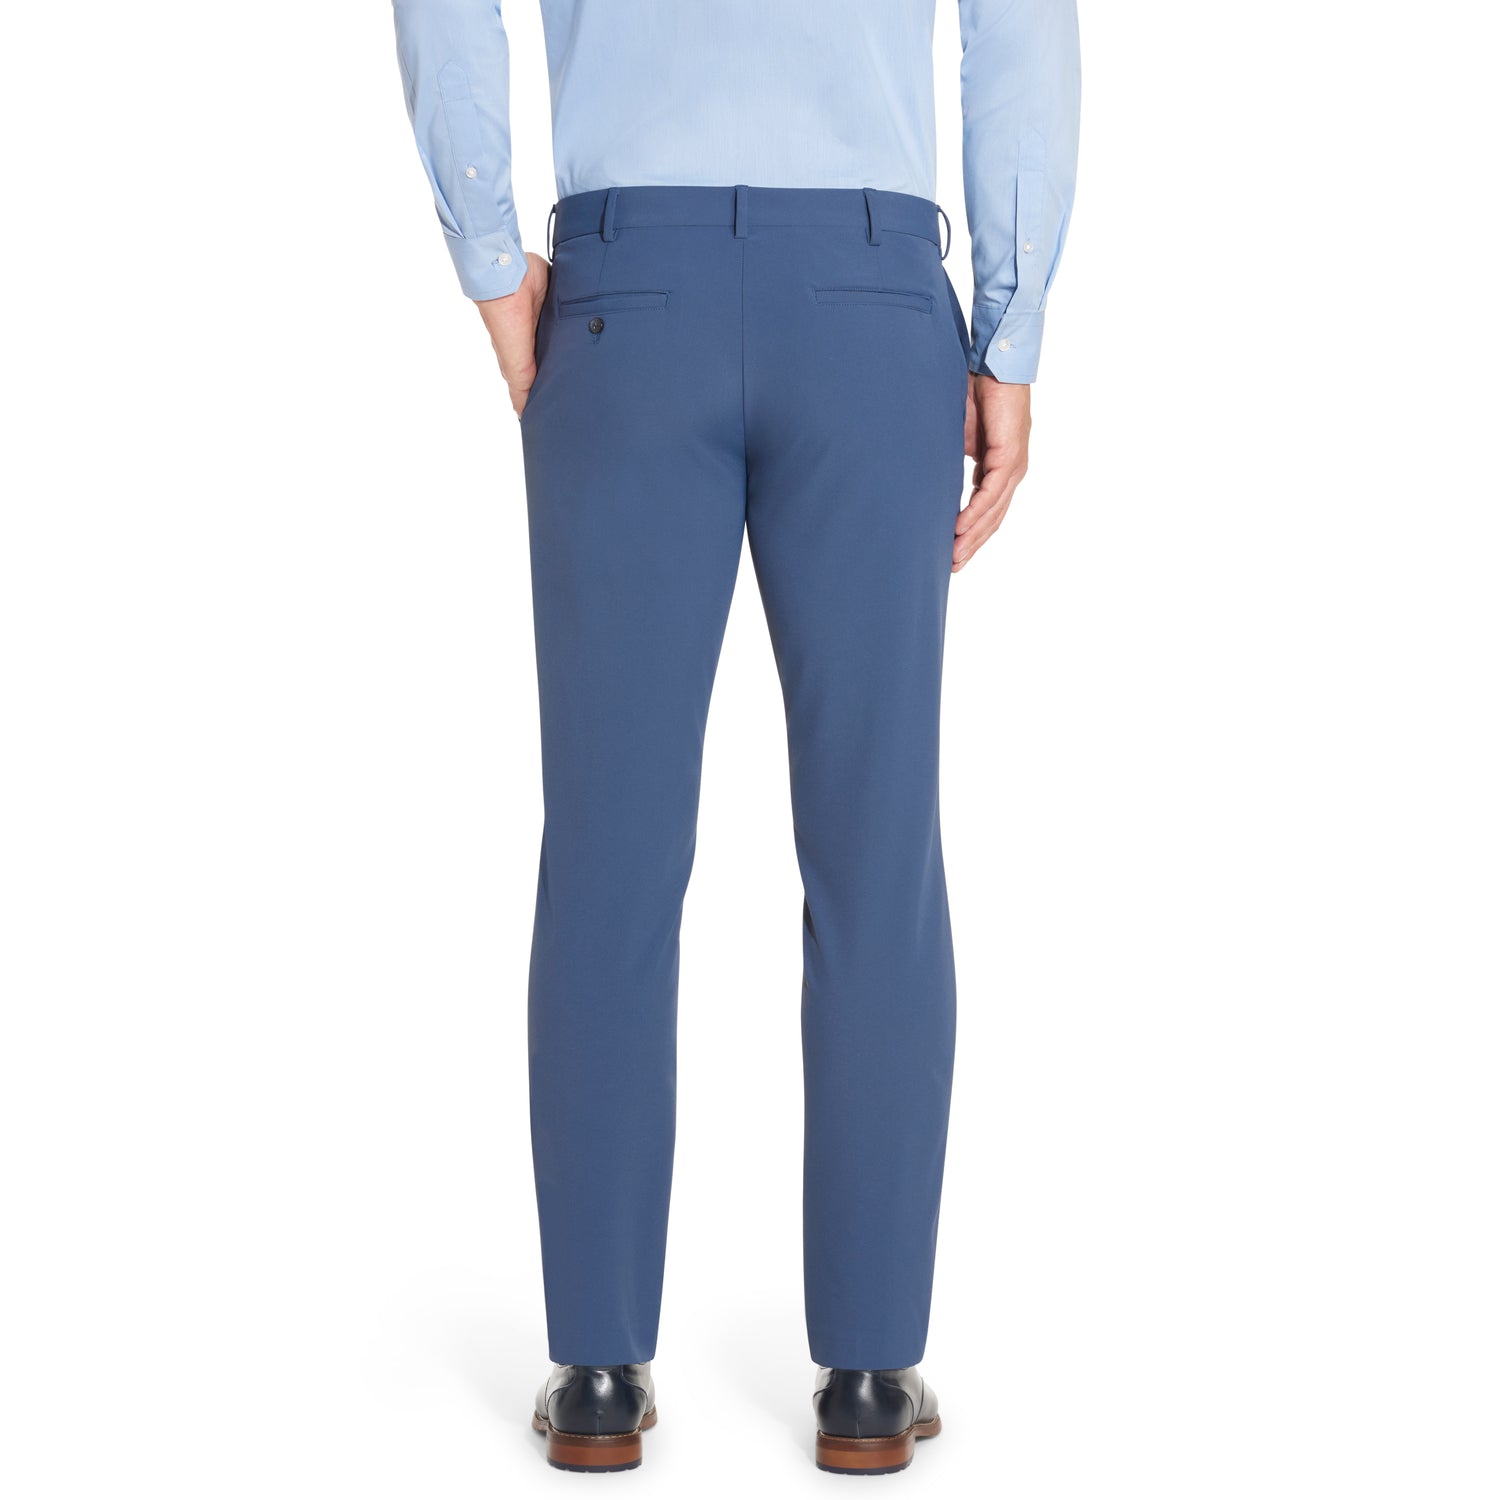 Stain Shield Flat Front Stretch Dress Pant - Slim Fit